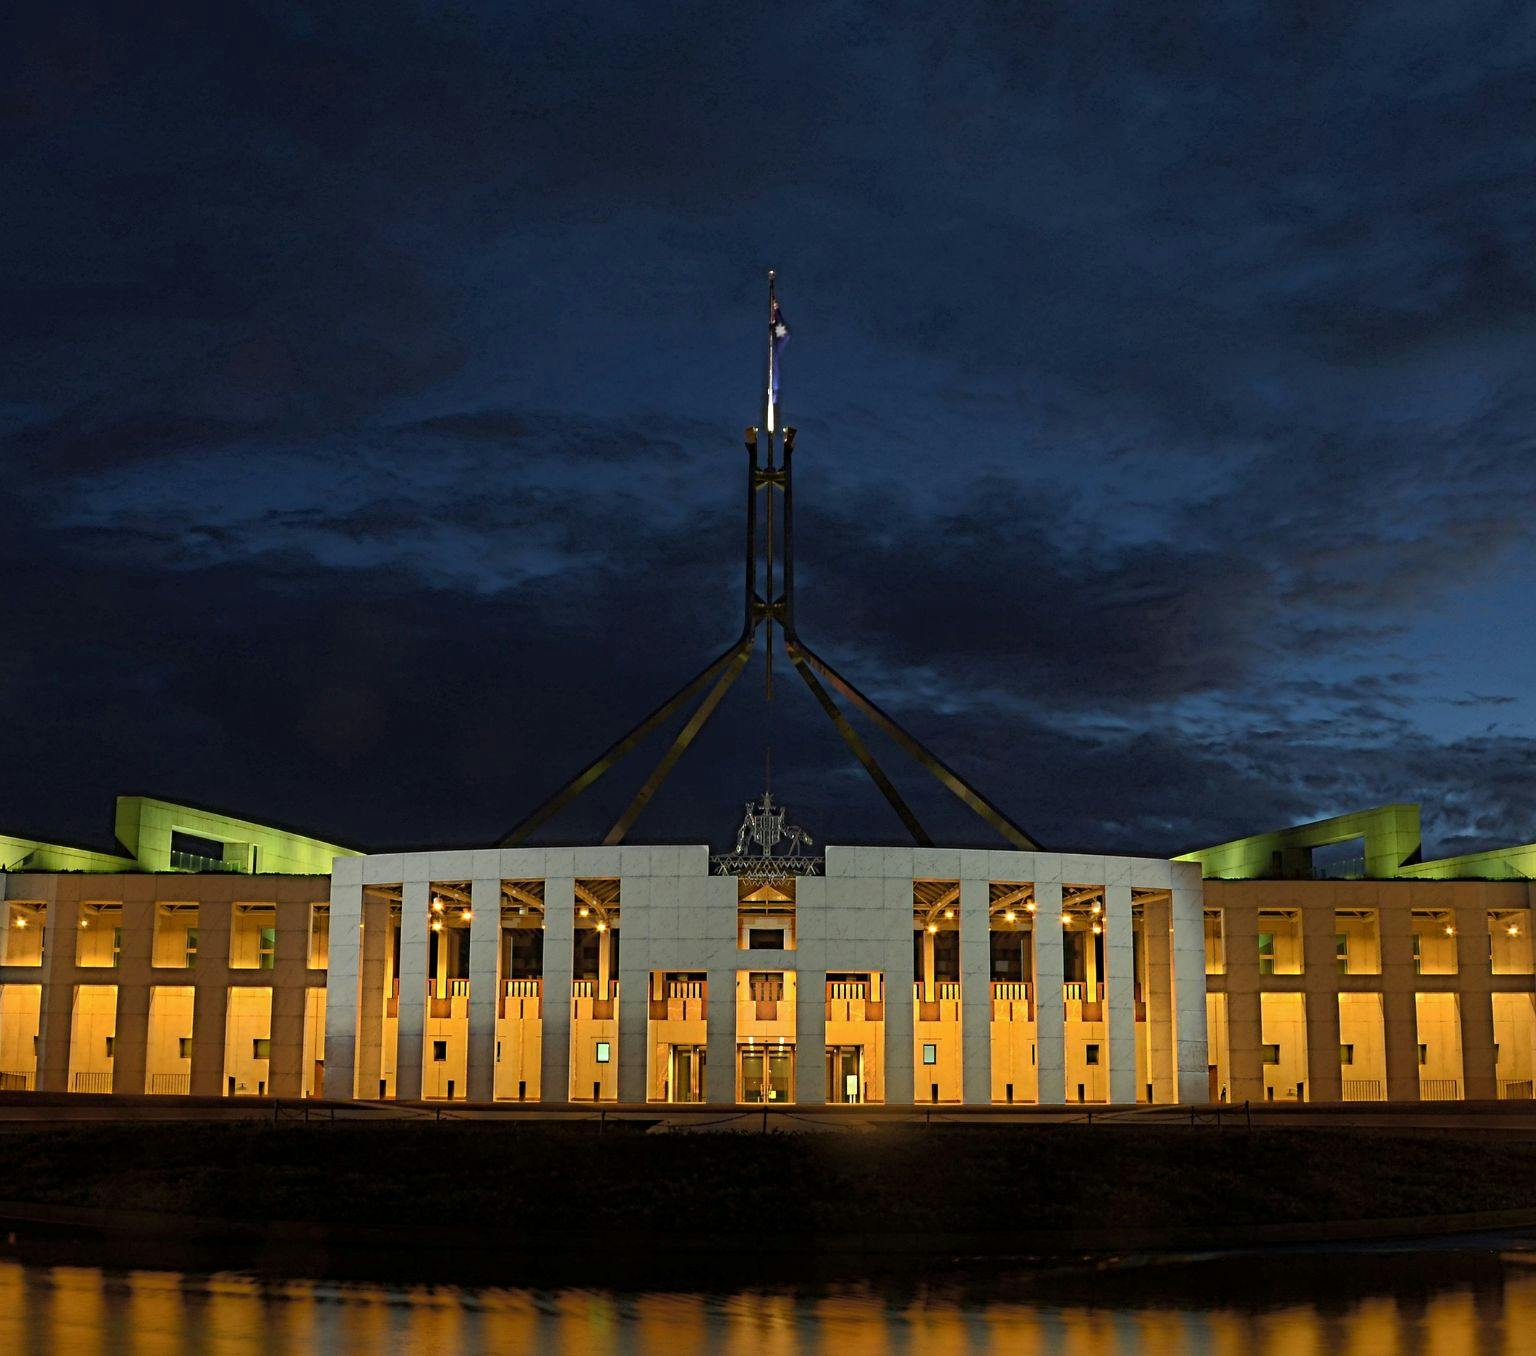 Parliament house lit up at night time.